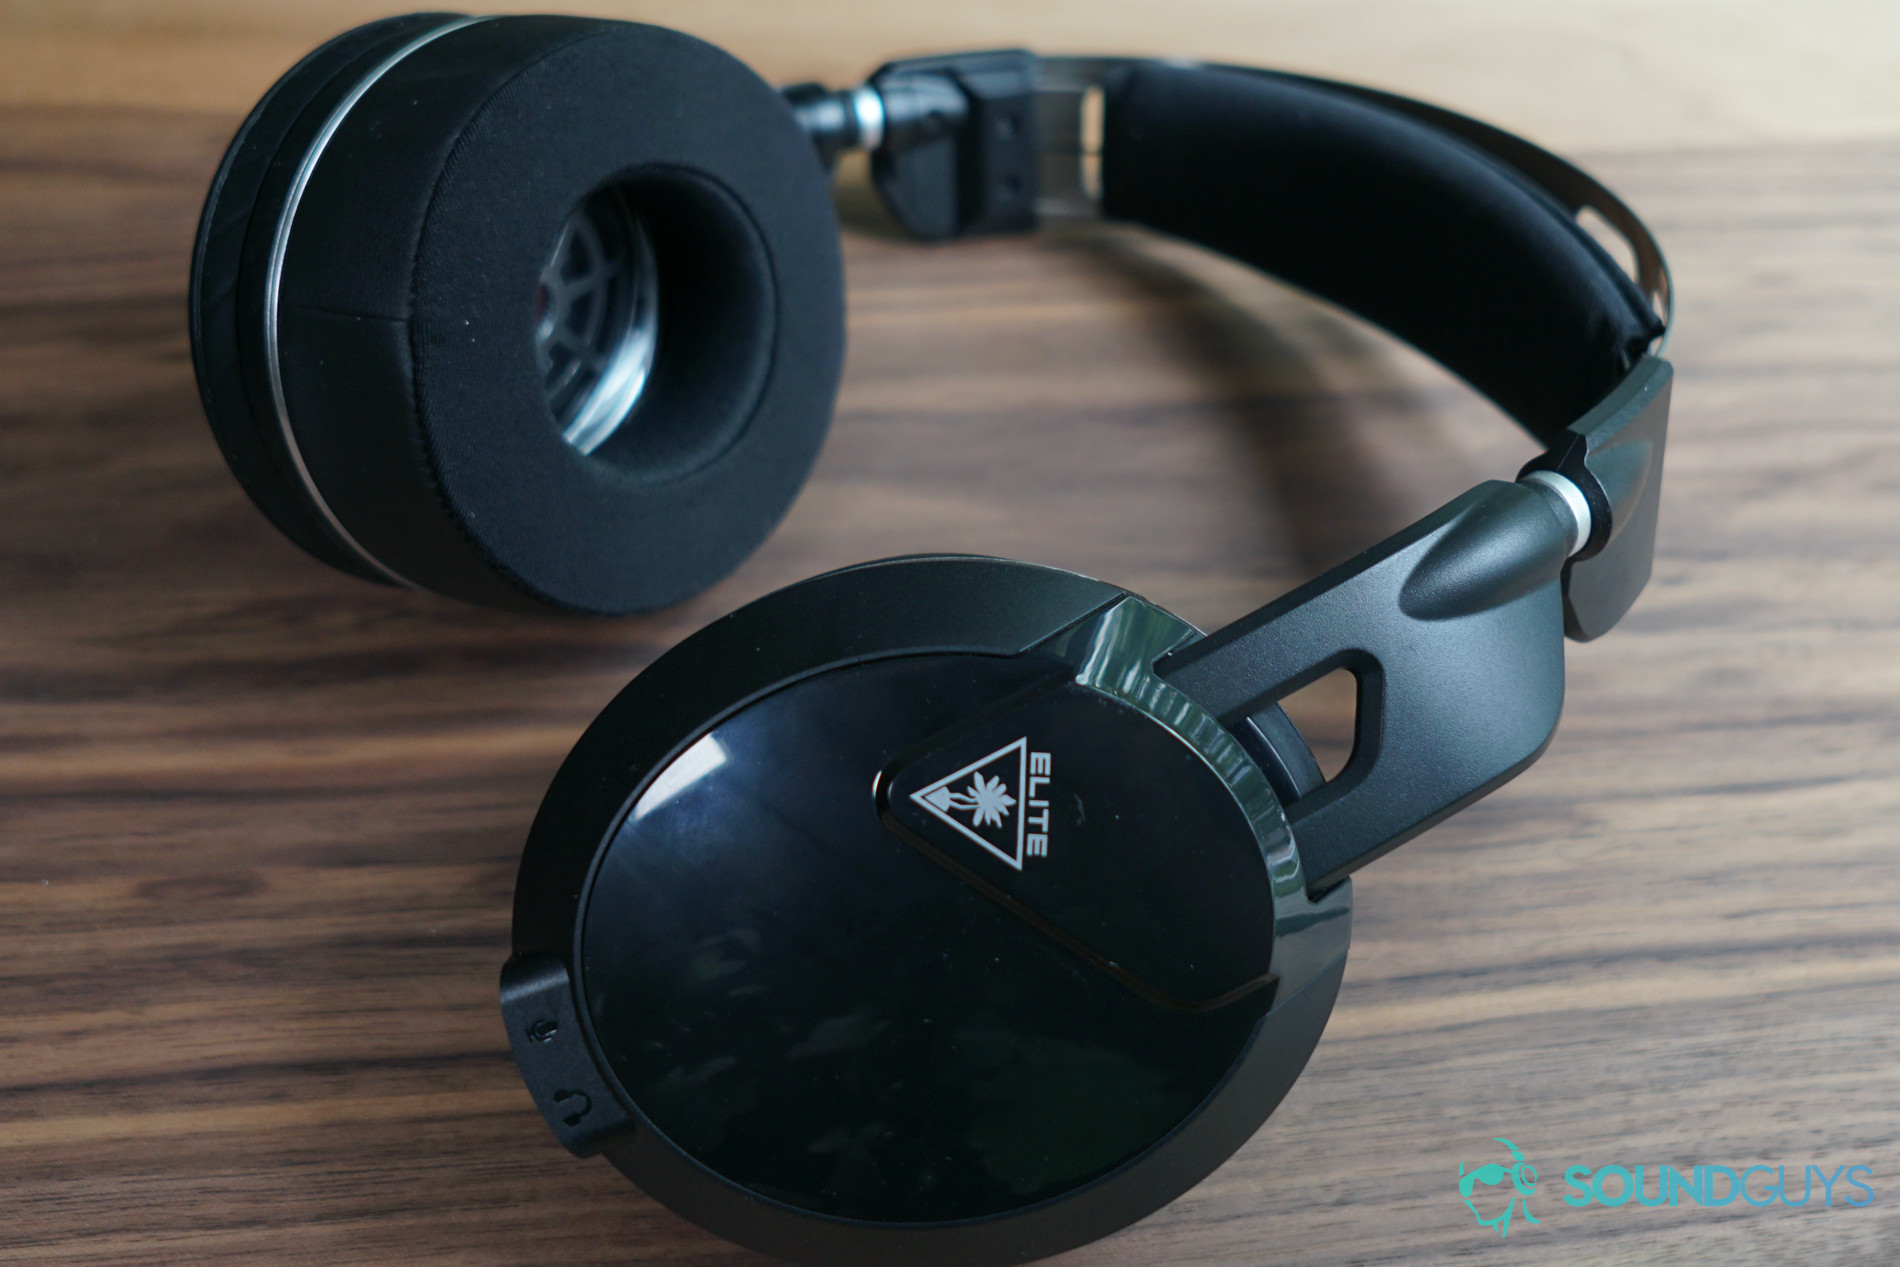 The Turtle Beach Elite Pro 2 sits on a wooden table